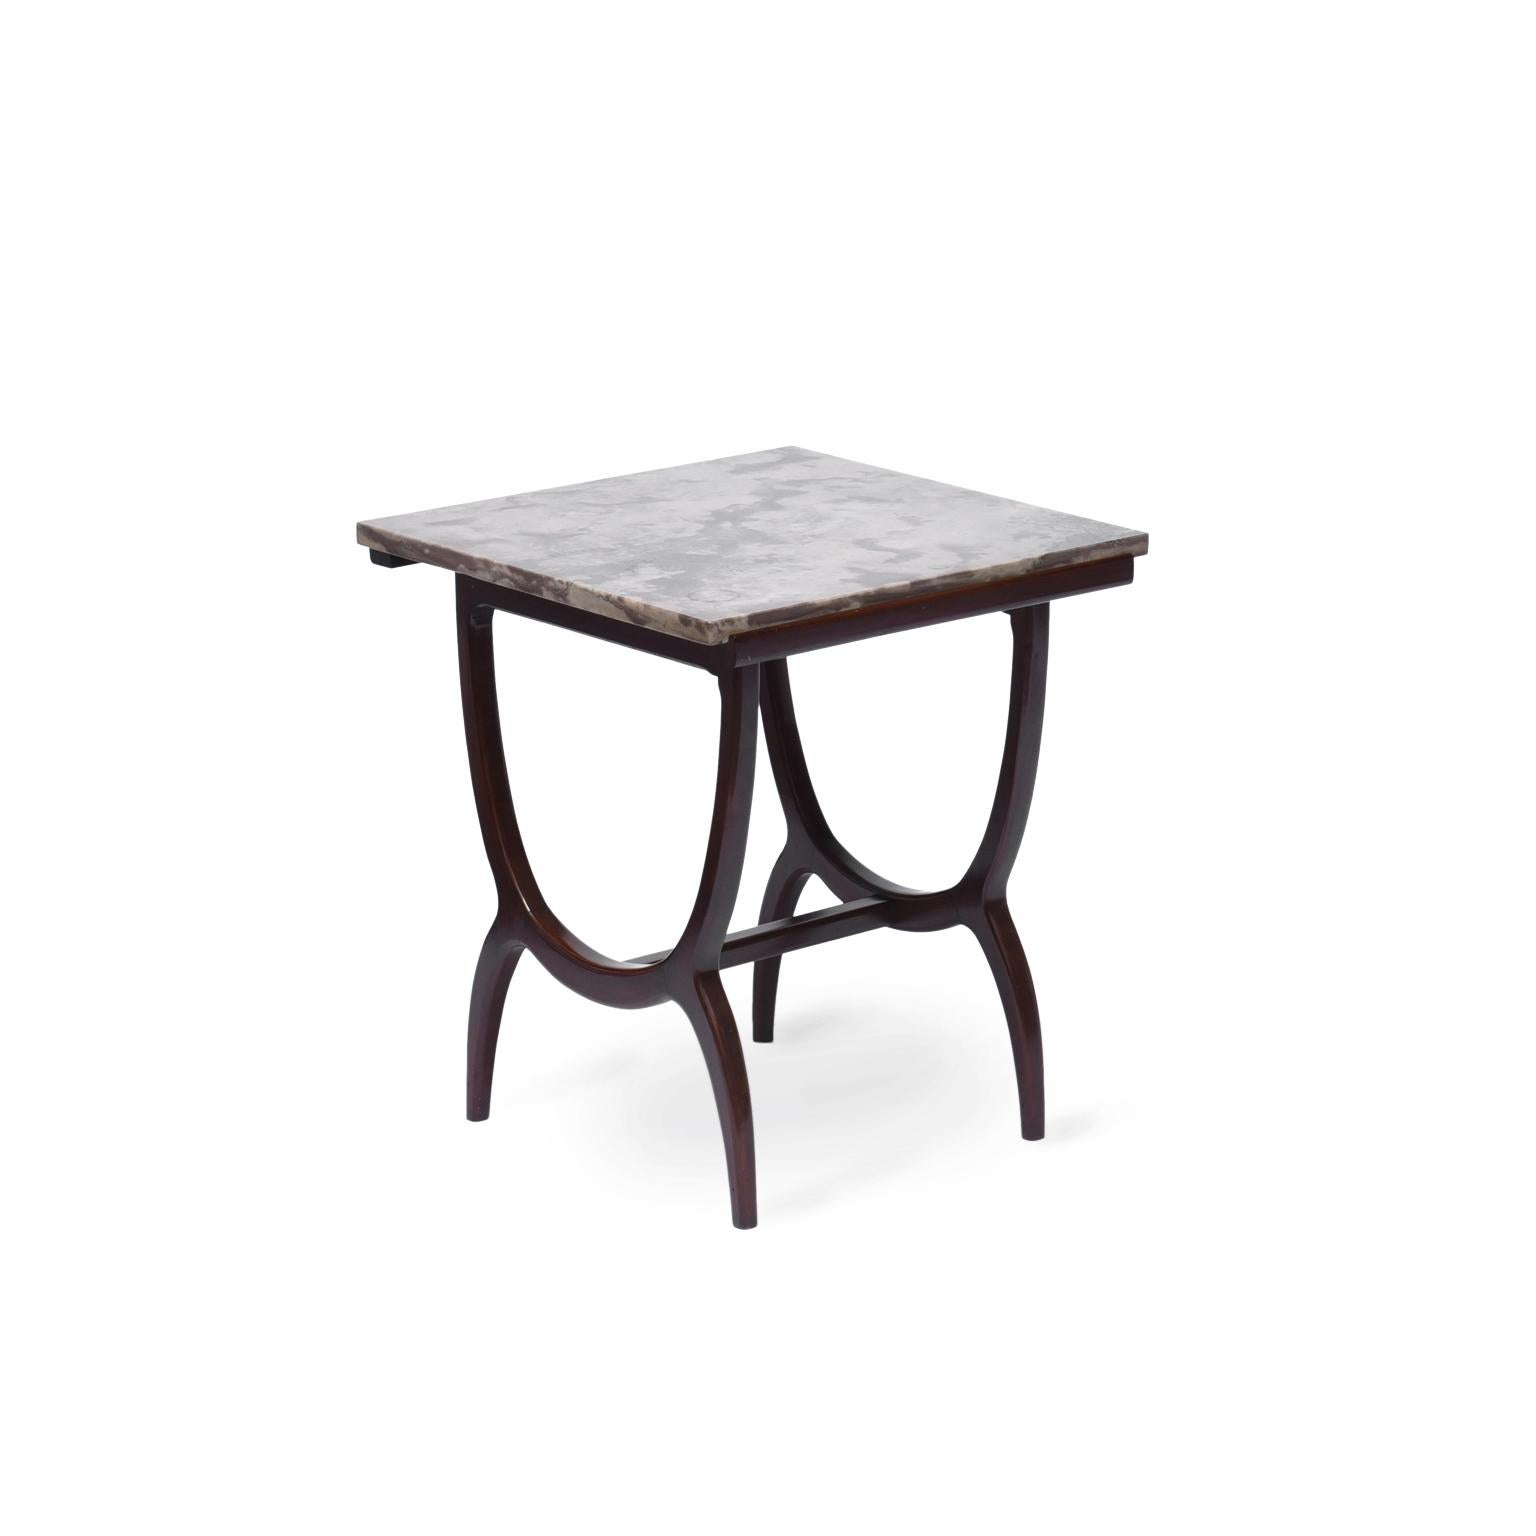 Móveis Teperman midcentury Brazilian side table with marble top, 1960s

with a handcrafted Brazilian wooden structure, this beautiful pair of auxiliary tables can be used in home environments or offices.